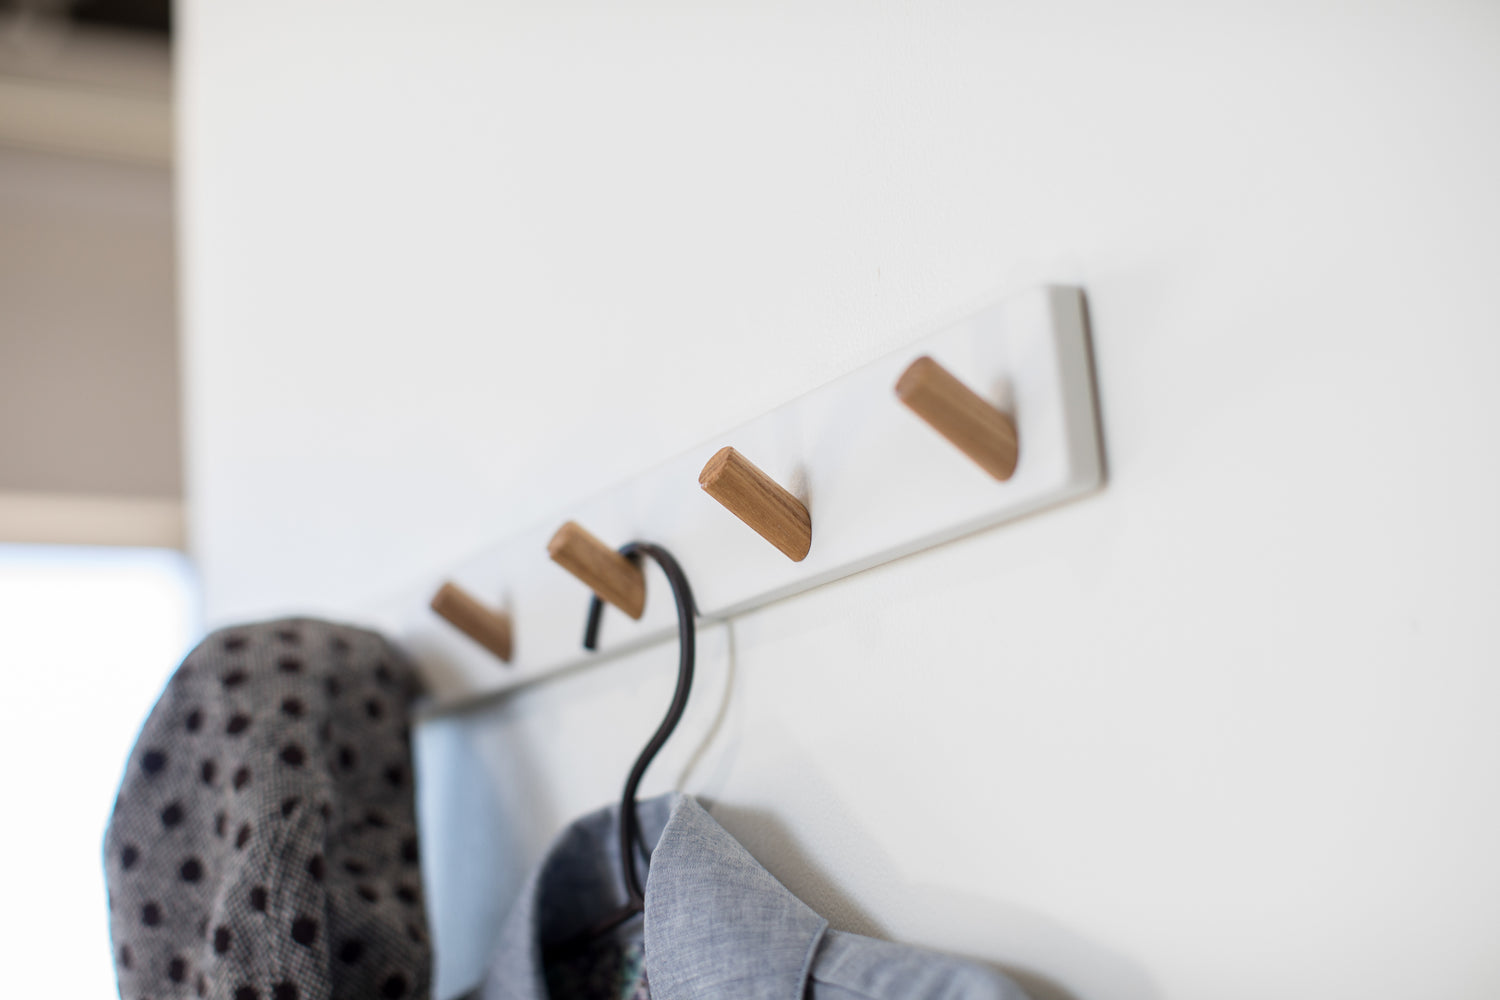 View 5 - White Wall-Mounted Coat Hanger displaying coat and hat by Yamazaki Home.